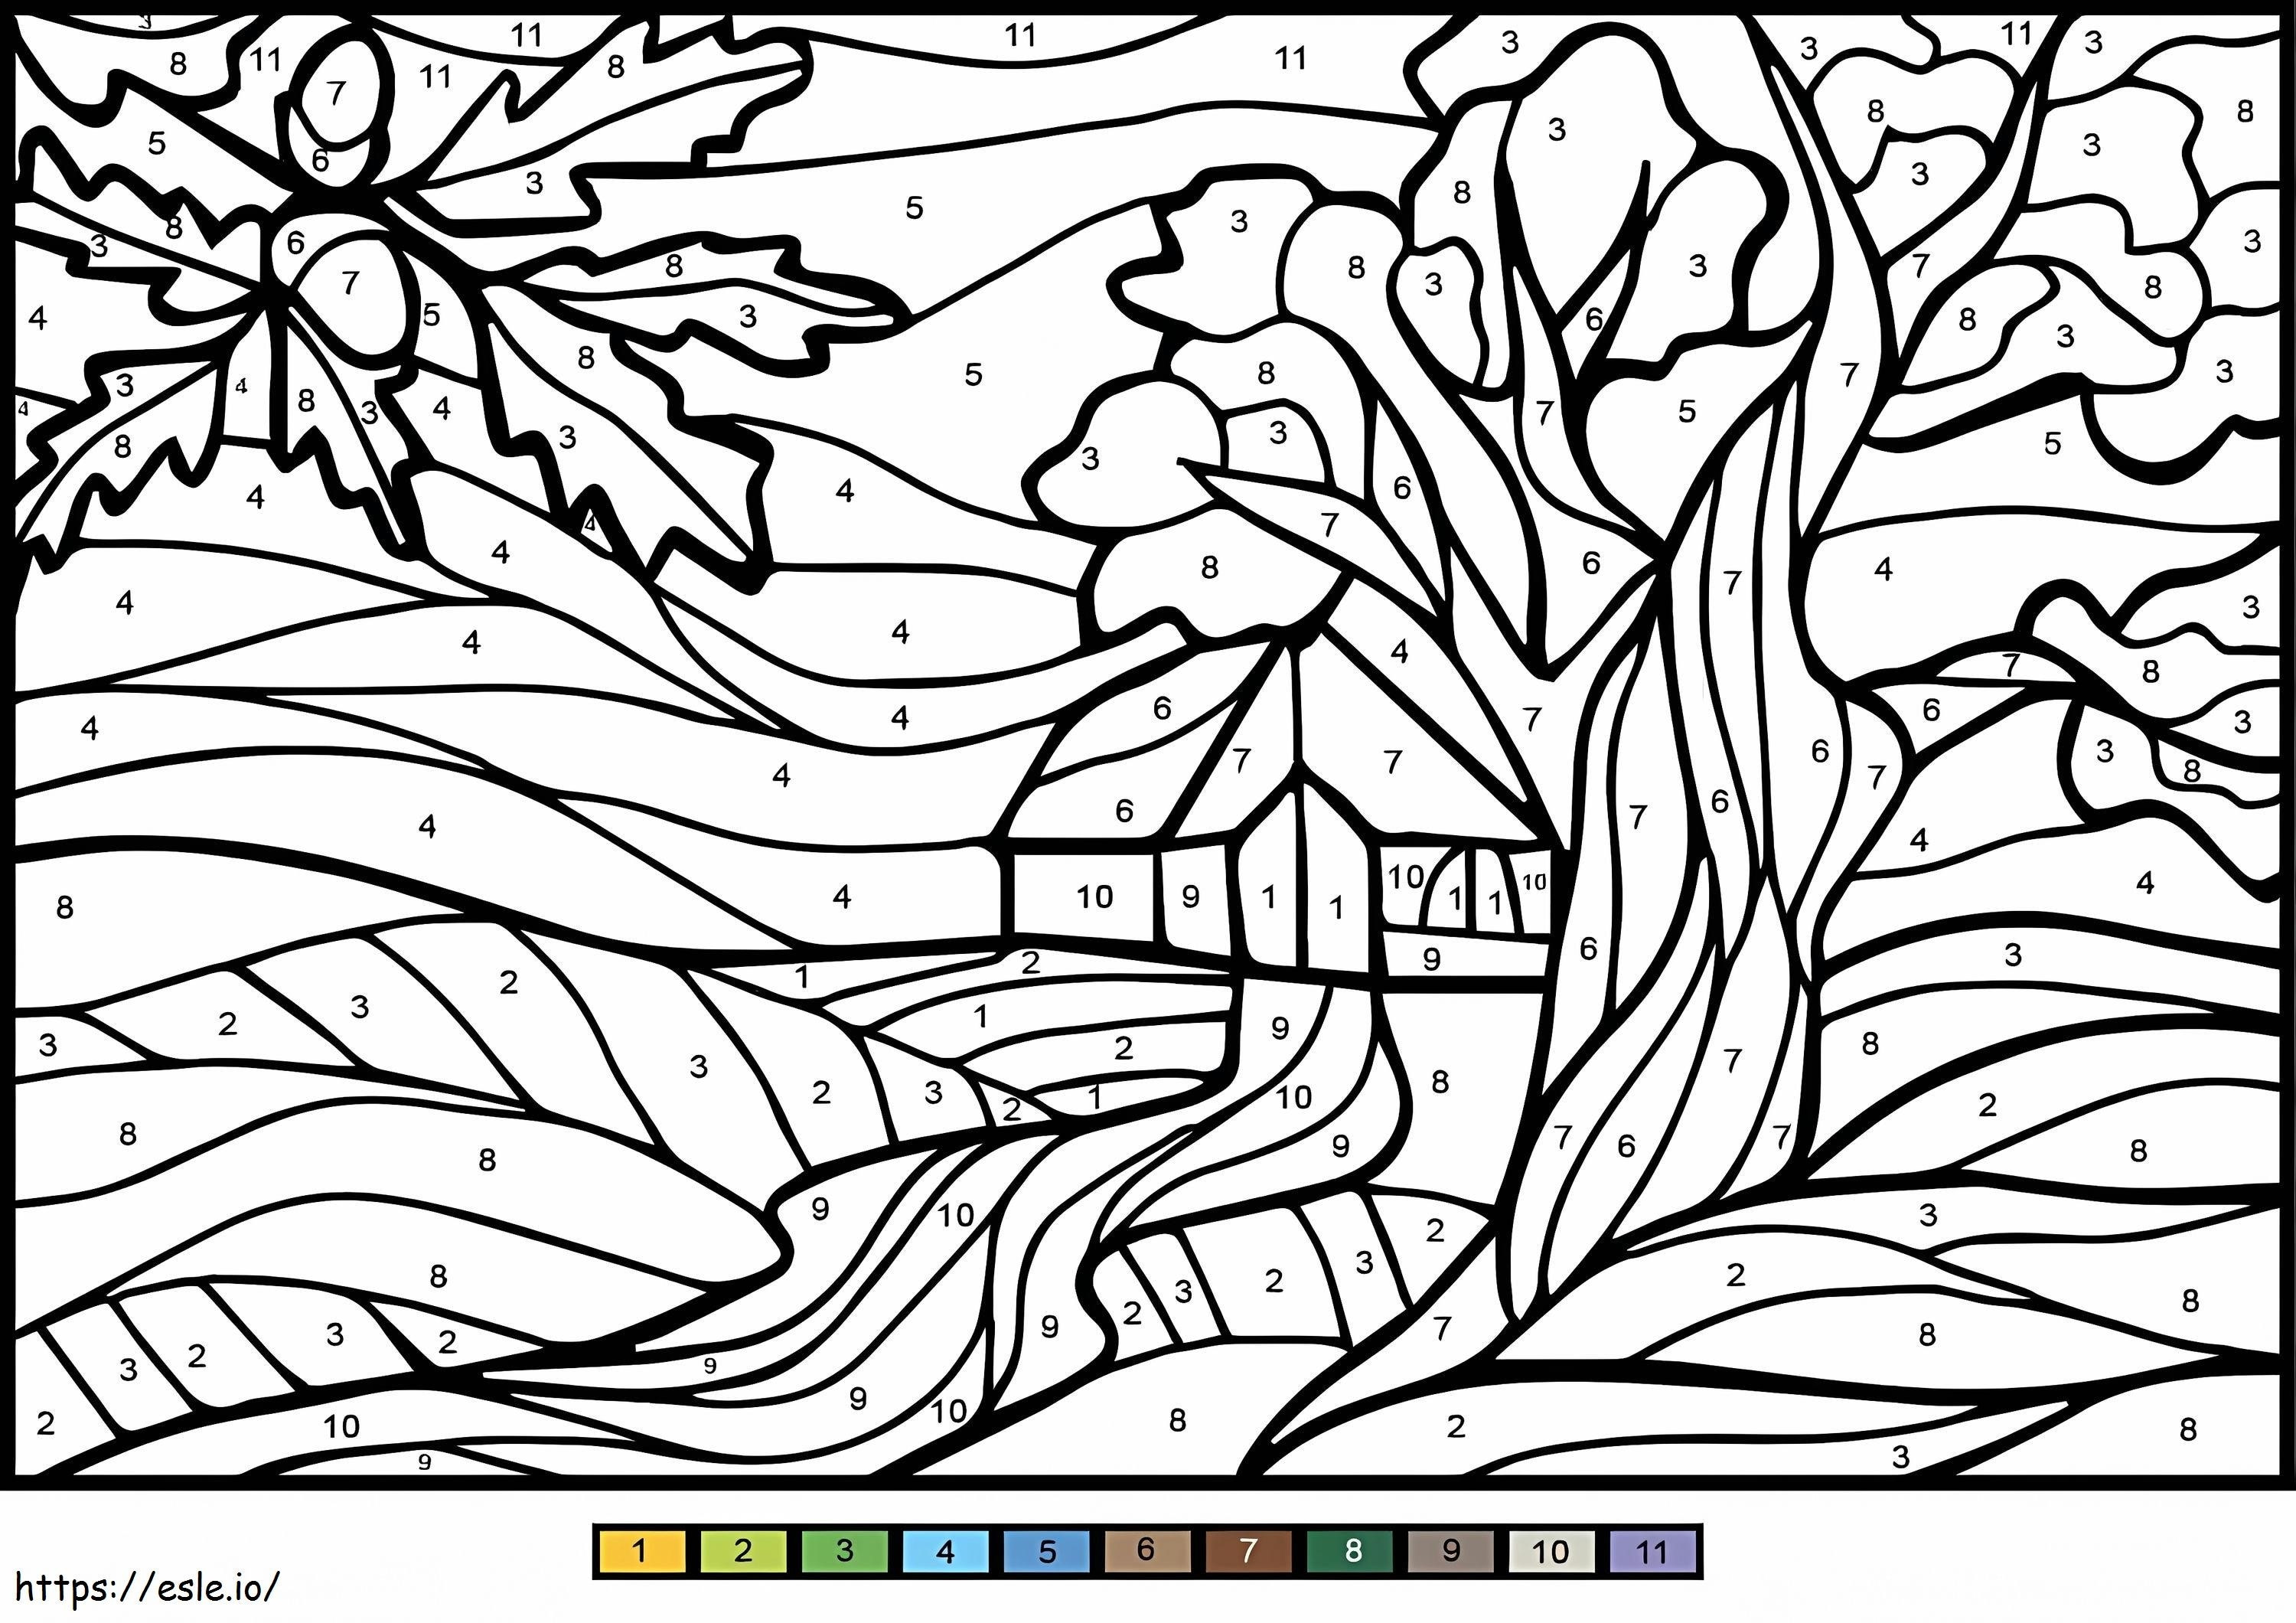 Oak Tree Color By Number coloring page